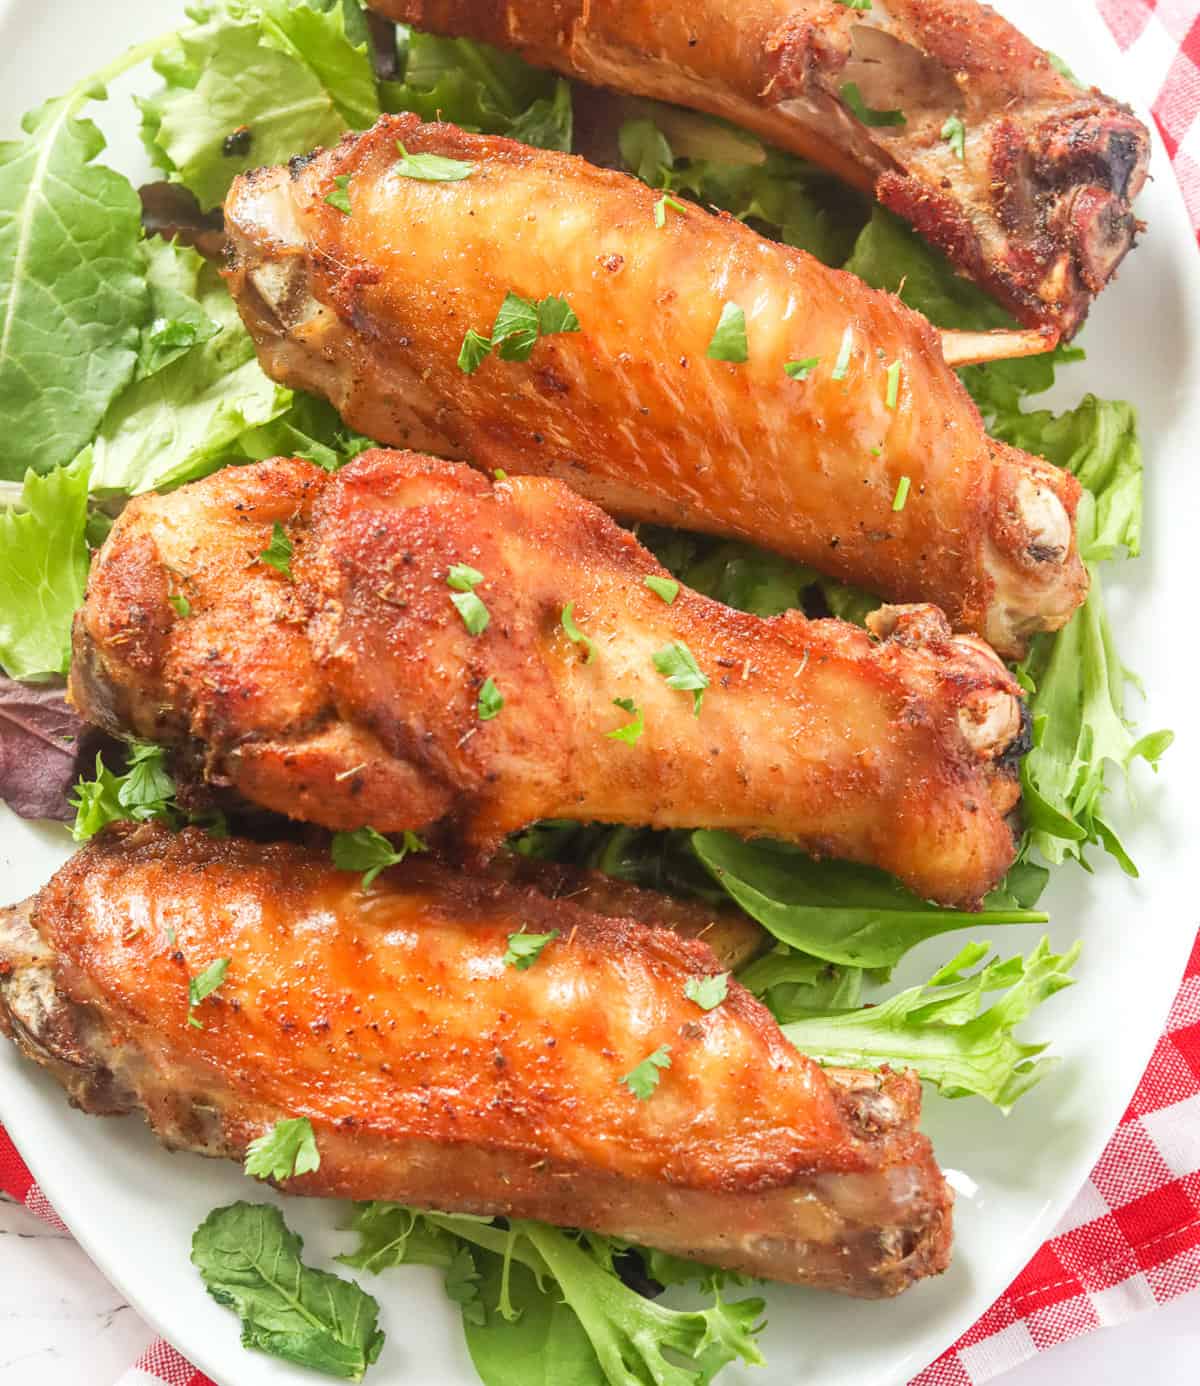 Freshly fried turkey wings perfect for an appetizer or main course